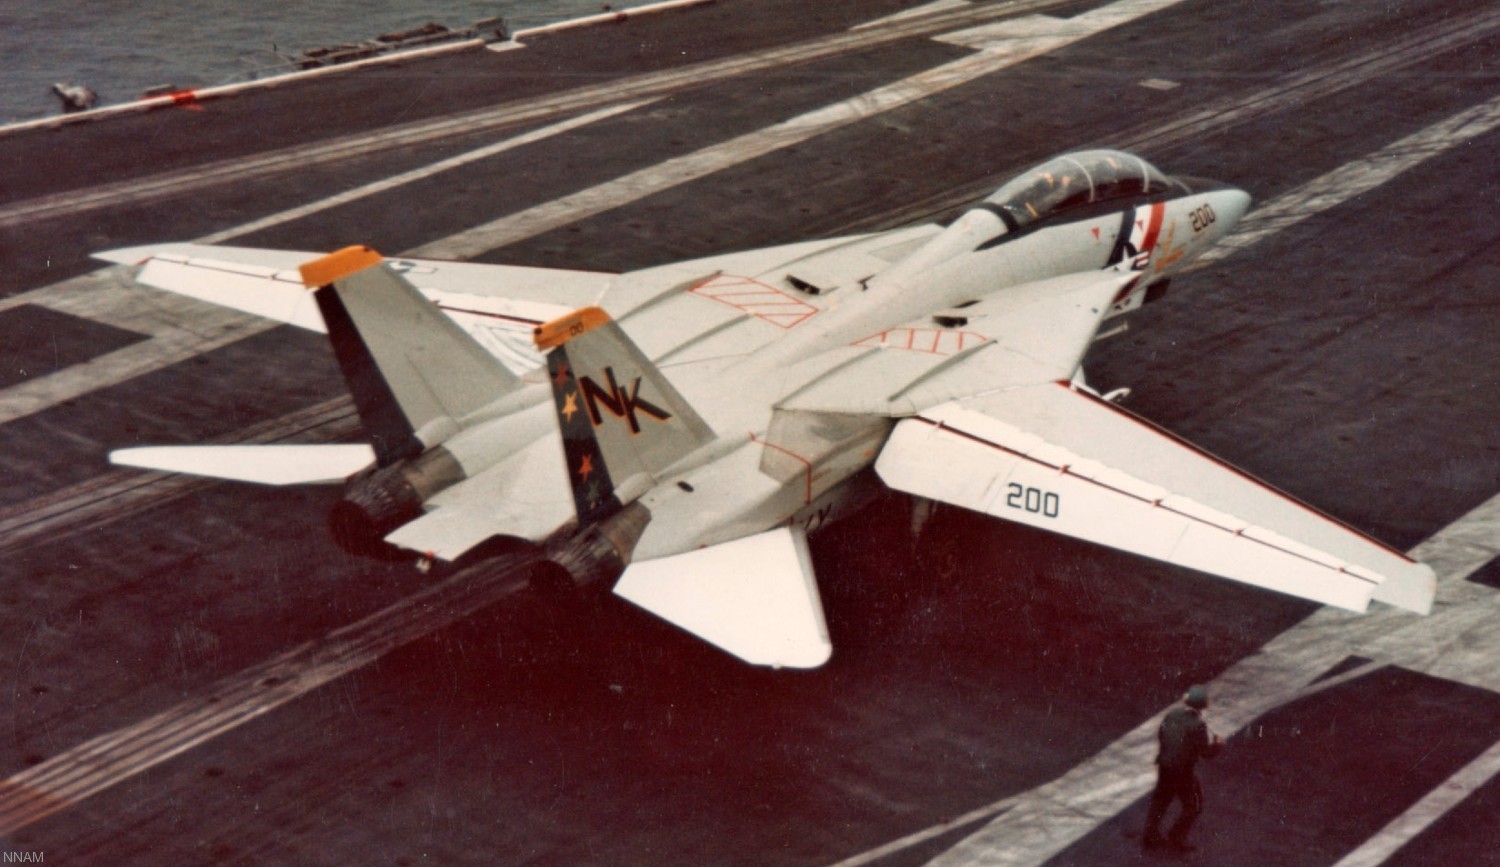 vf-2 bounty hunters fighter squadron fitron f-14a tomcat carrier air wing cvw-14 62